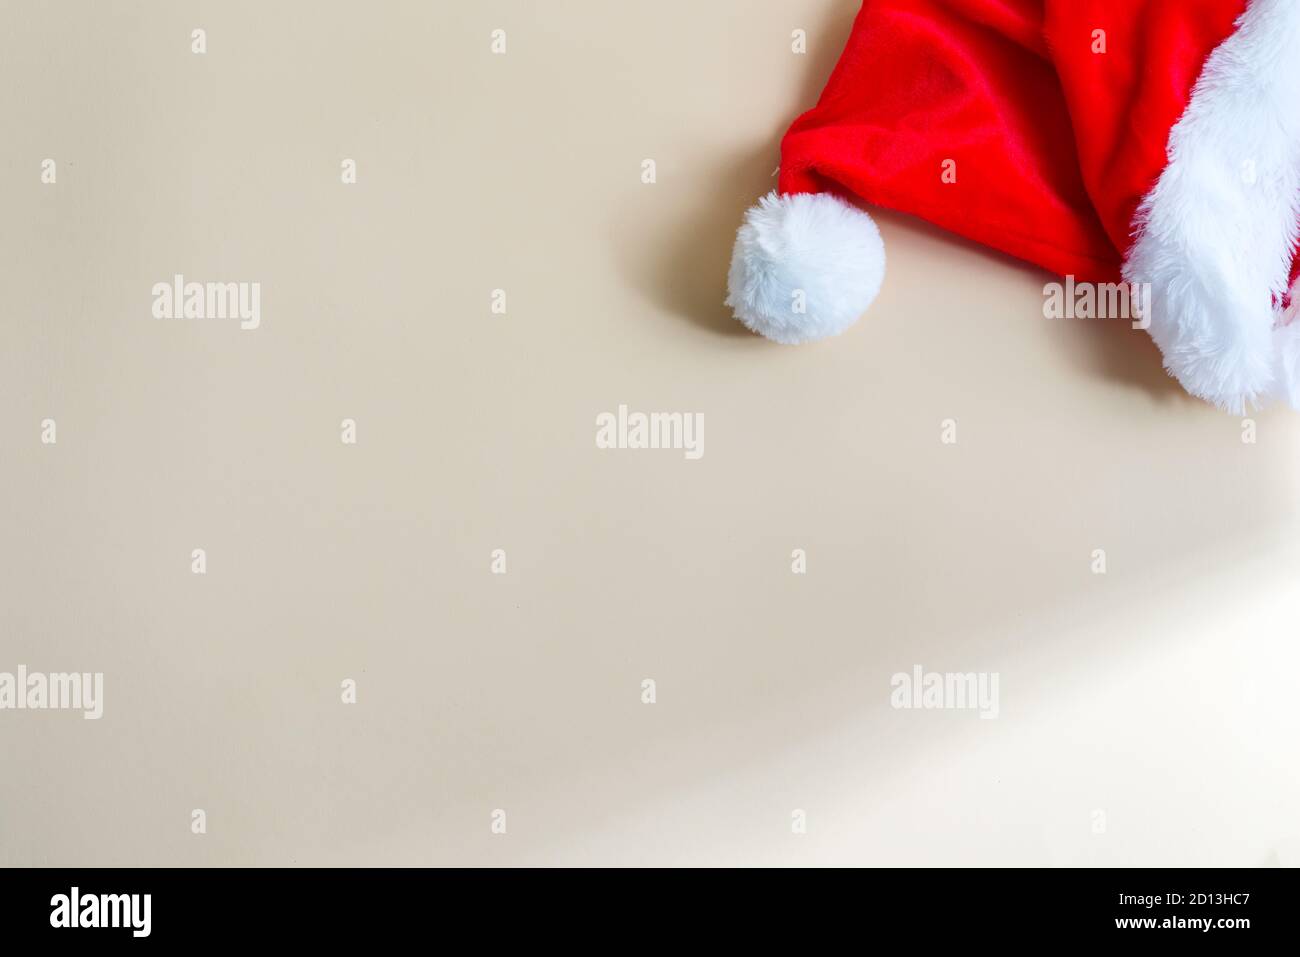 Red Santa Claus hat on a light beige background. Stock Photo